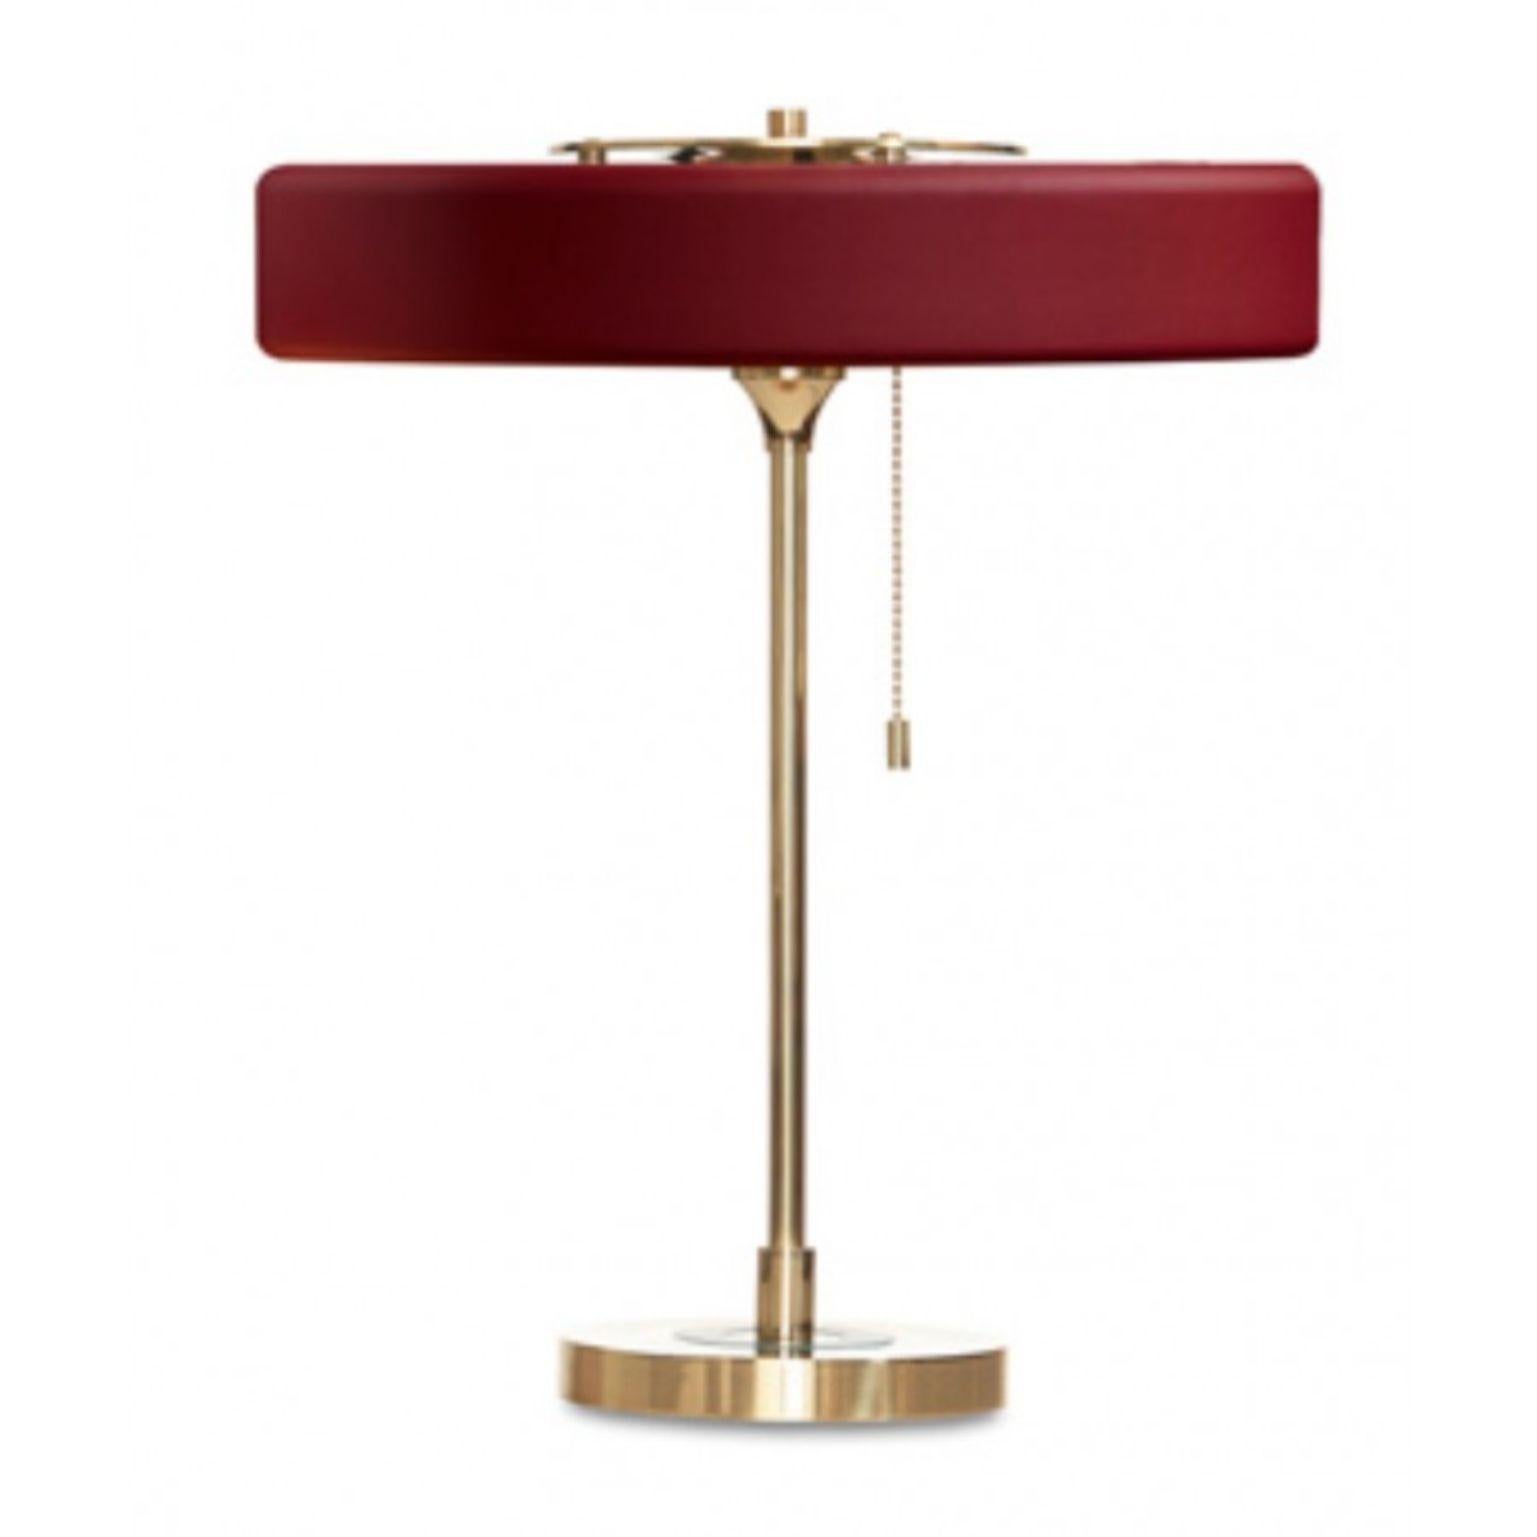 Revolve table lamp - Polished Brass - Oxblood by Bert Frank
Dimensions: 42 x 35 x 15 cm
Materials: Brass, steel

Also Available in brushed brass

When Adam Yeats and Robbie Llewellyn founded Bert Frank in 2013 it was a meeting of minds and the start